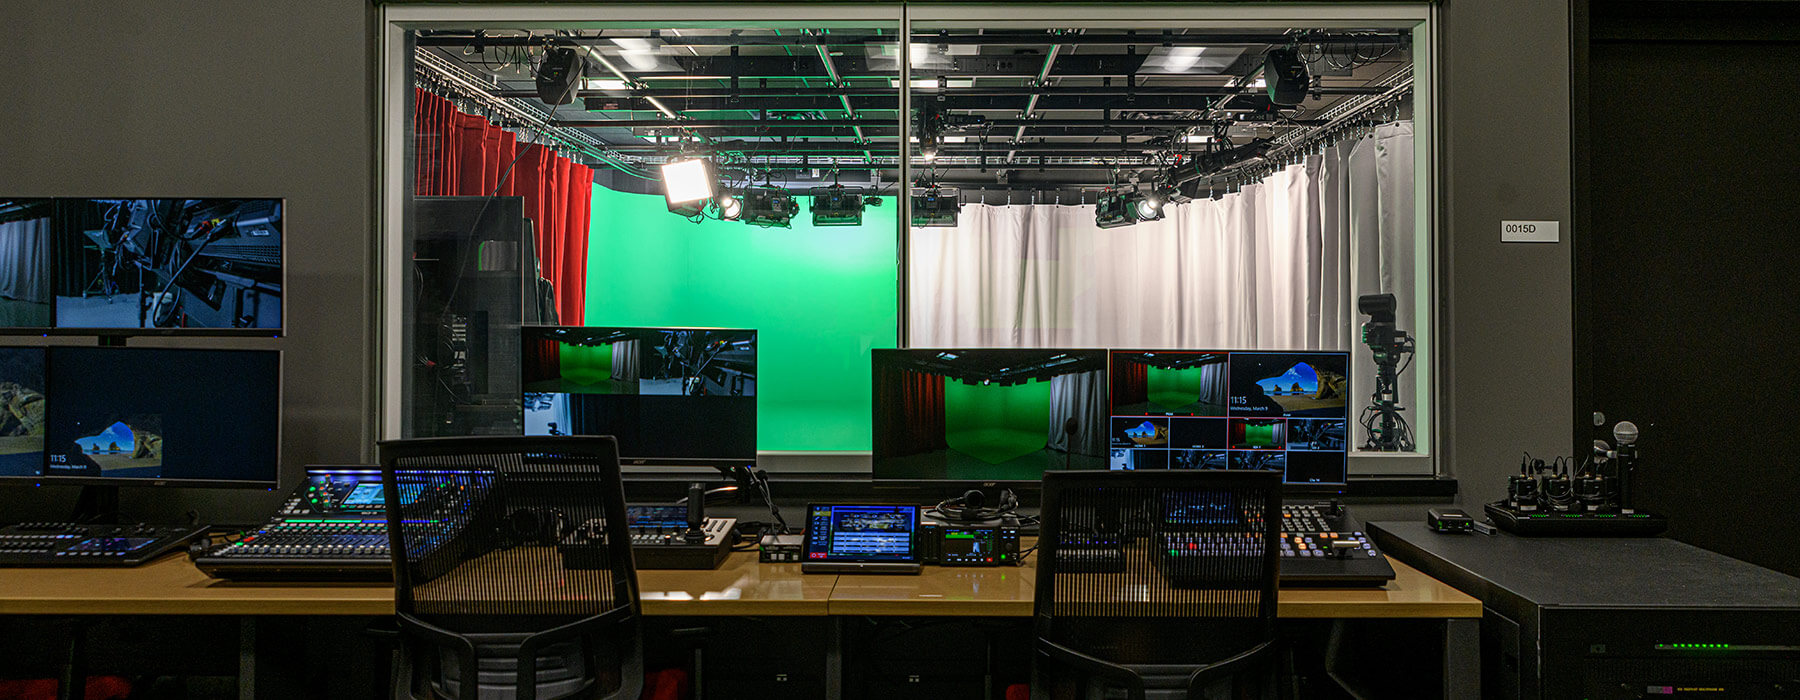 Control room of Jellison Studios shows computer monitor displaying several camera angles of one of the Black Box Studios. Through the control room window, the view of the studio room shows a partial red curtain, a green screen, and a white curtain. Lights and cameras are mounted in the ceiling.